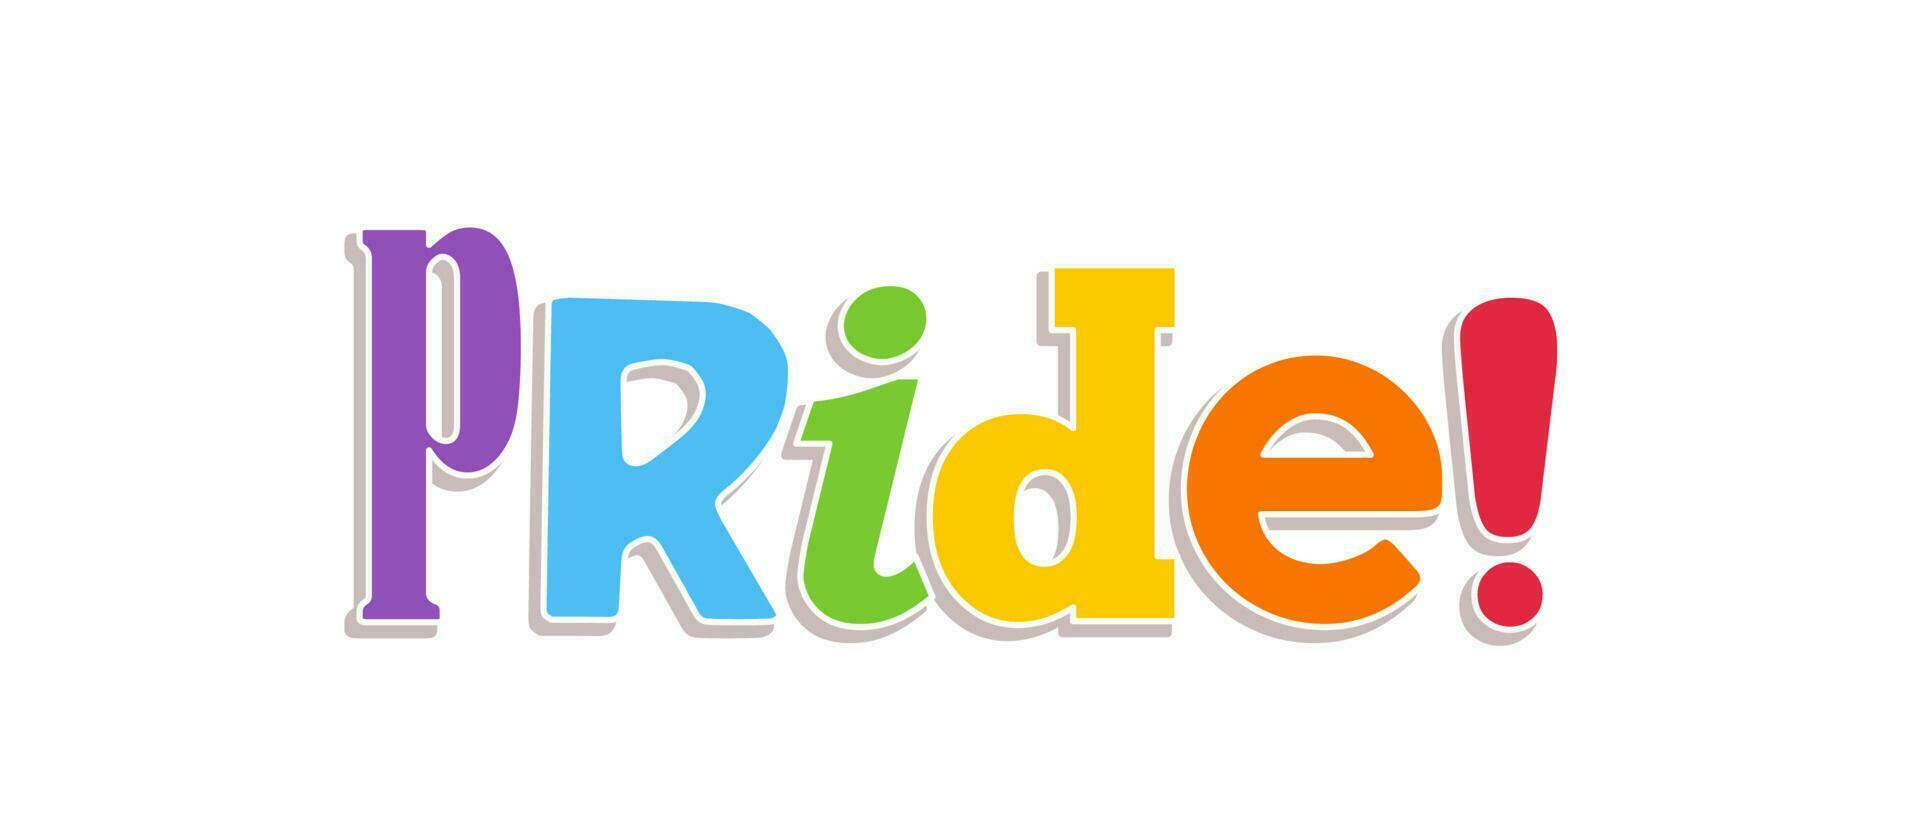 Pride lettering with rainbow flag colors. Different style letters forming the Pride word. vector